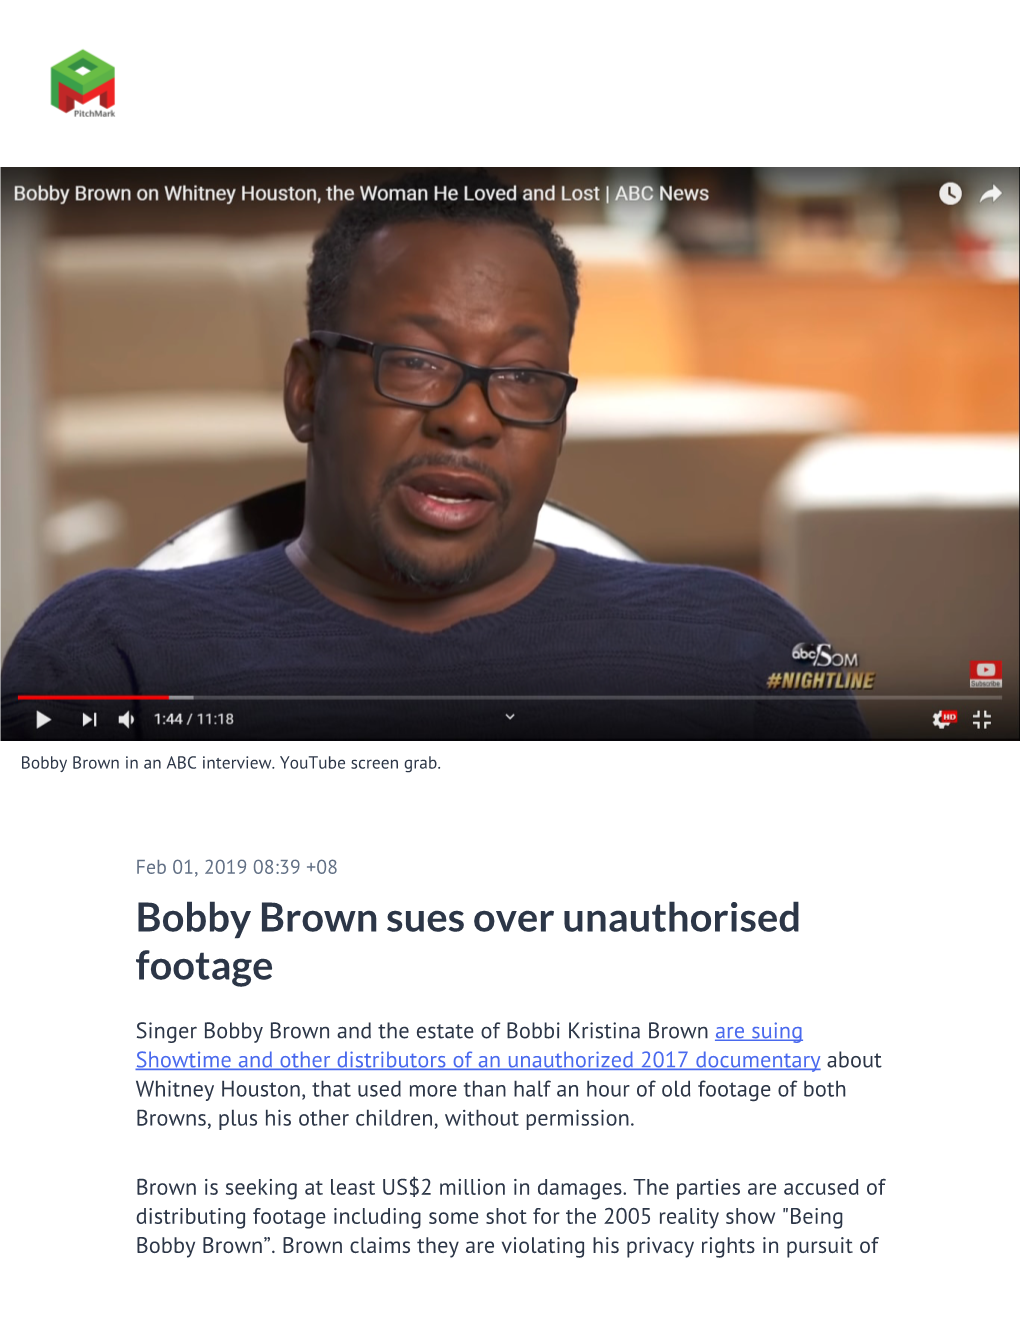 Bobby Brown Sues Over Unauthorised Footage